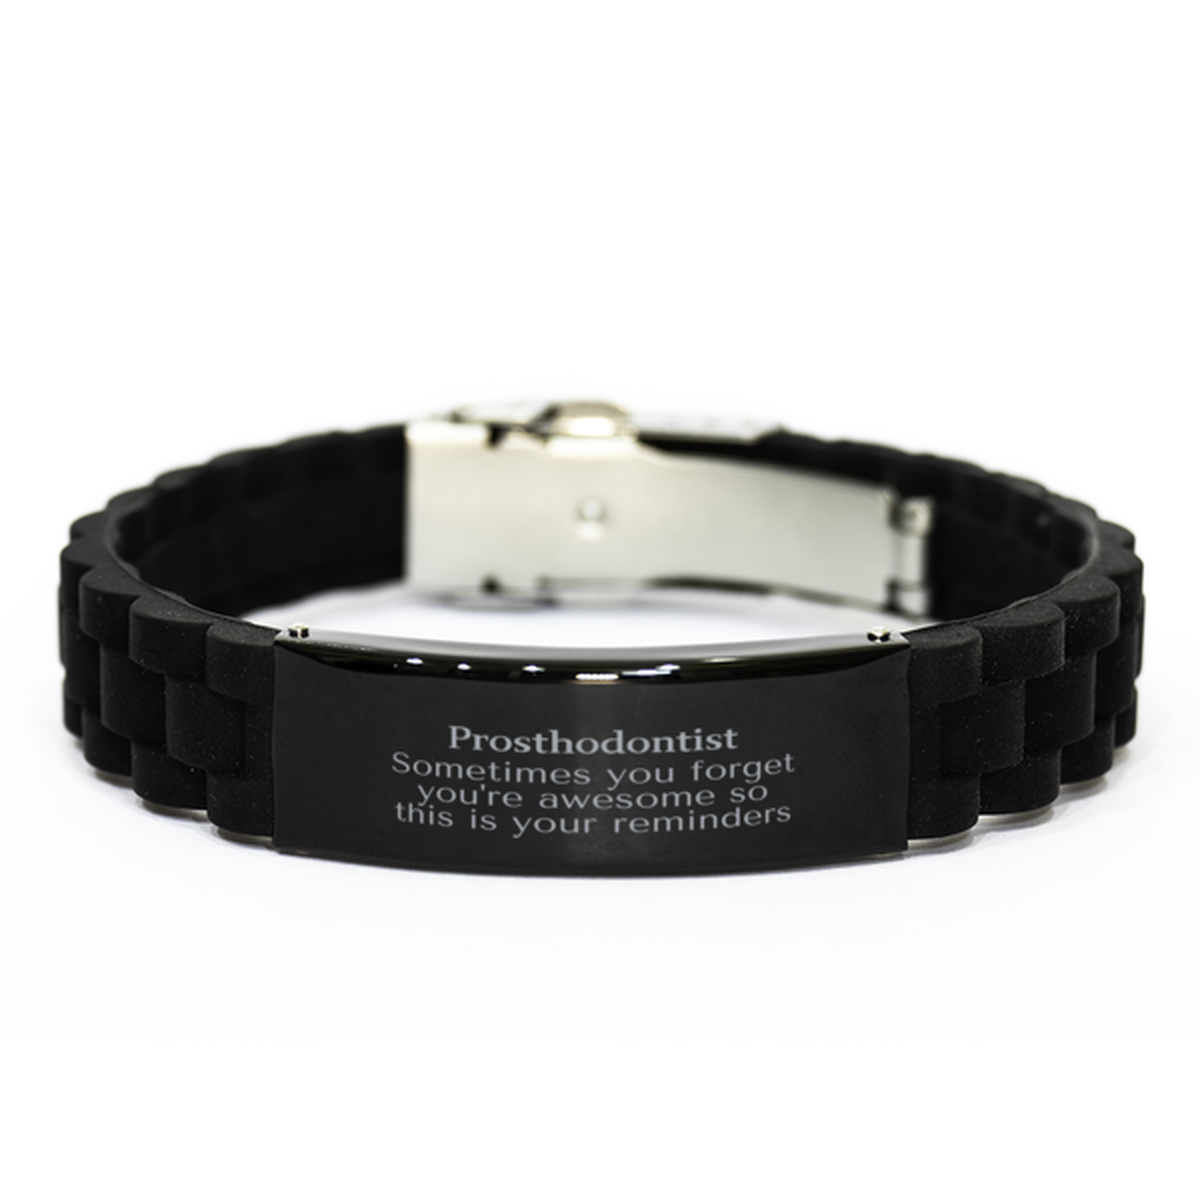 Sentimental Prosthodontist Black Glidelock Clasp Bracelet, Prosthodontist Sometimes you forget you're awesome so this is your reminders, Graduation Christmas Birthday Gifts for Prosthodontist, Men, Women, Coworkers